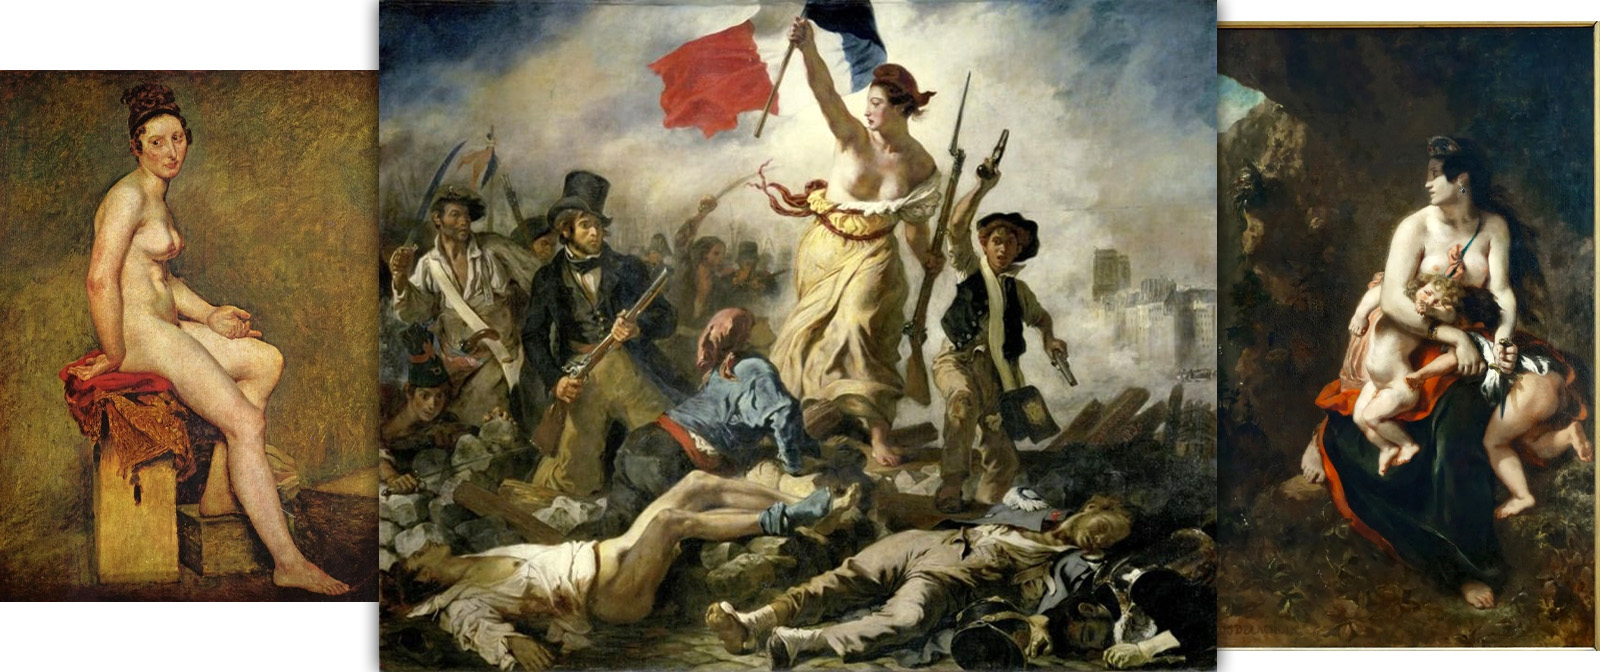 He wrote obscene letters and considered Dominique Engrès his sworn enemy. What was Eugène Delacroix like in life?